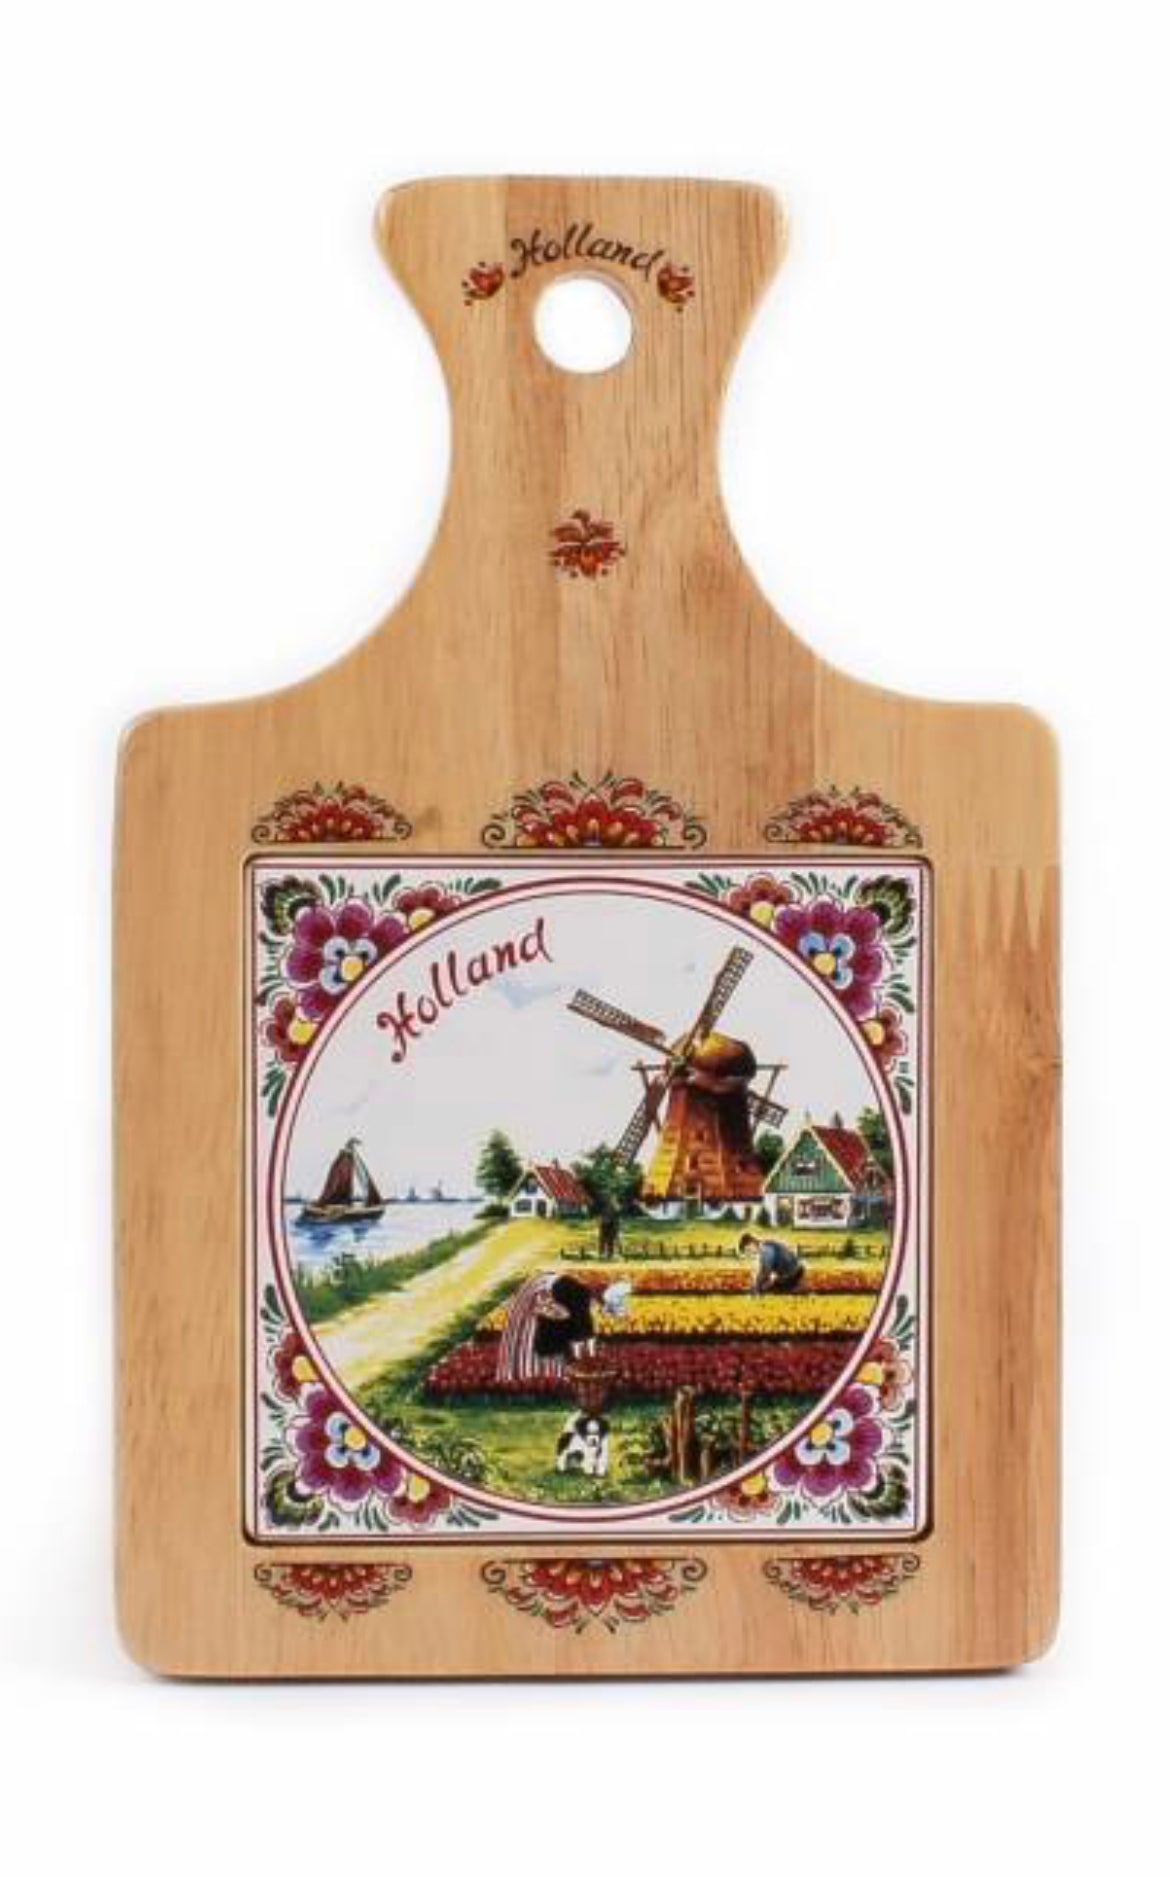 Cheese cutting board wood/Delft tile